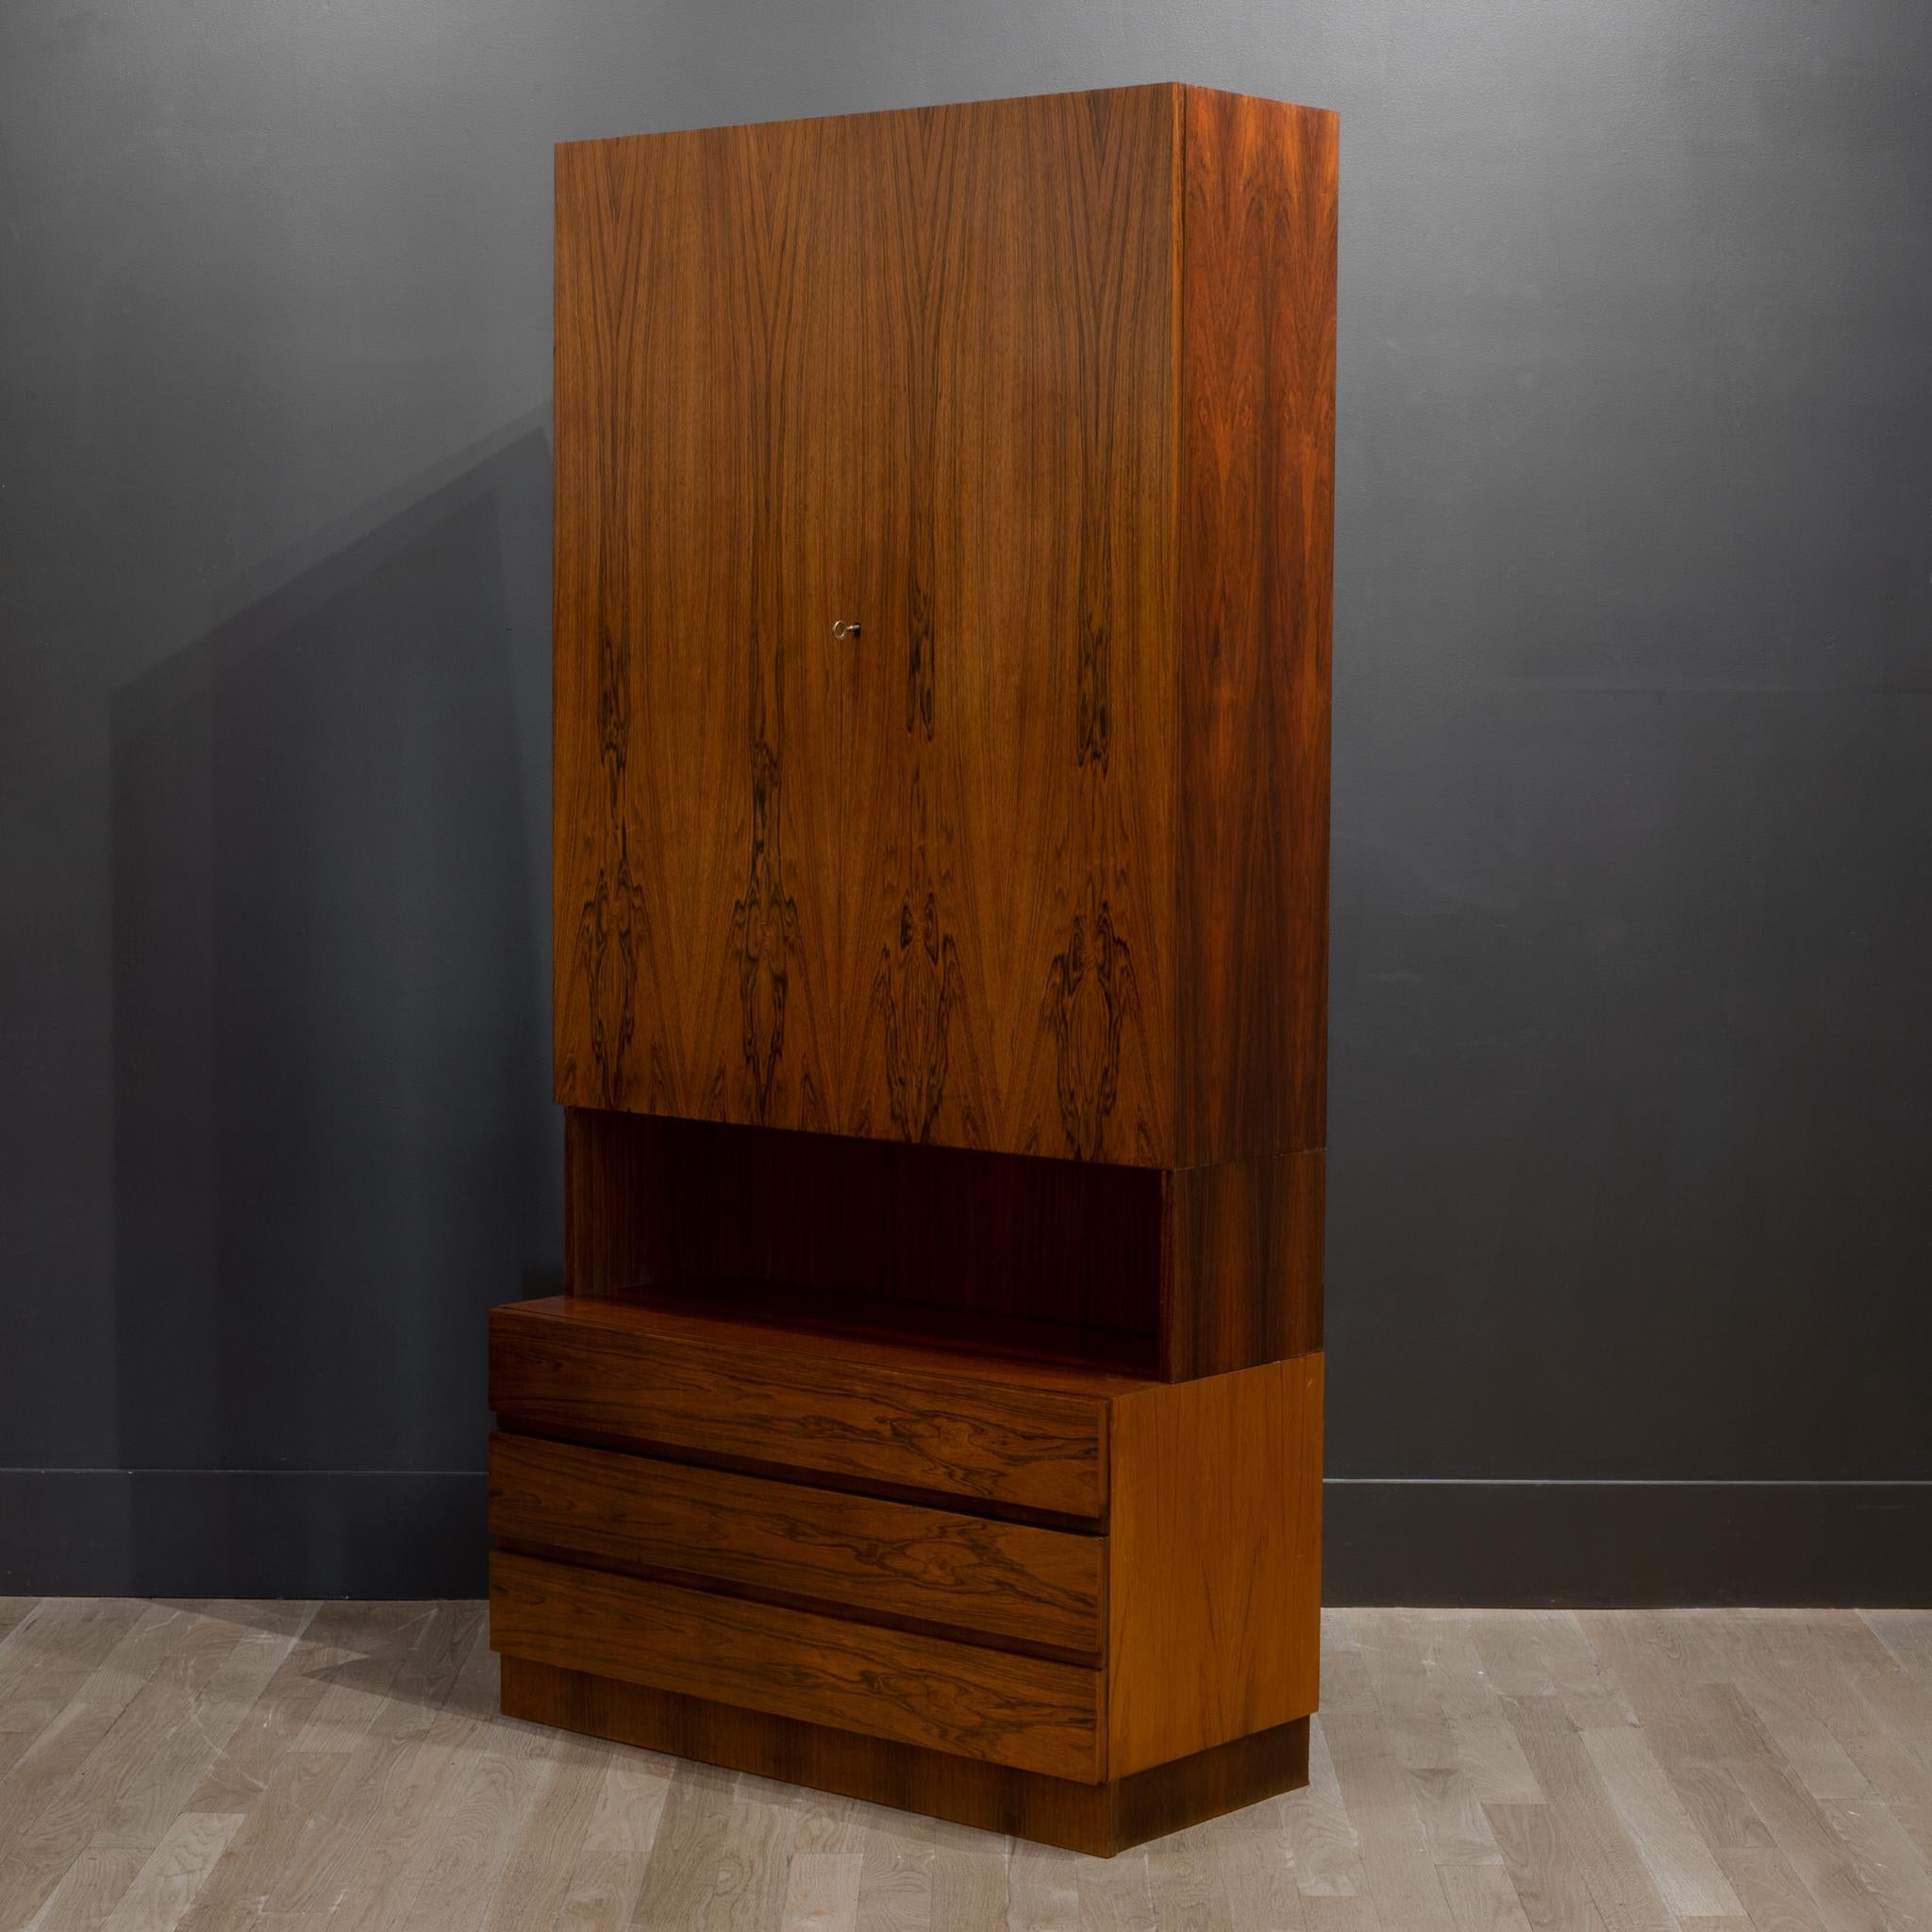 Midcentury Rosewood Modular Wall Unit Designed by Georg Satink for WK Mobel c 1